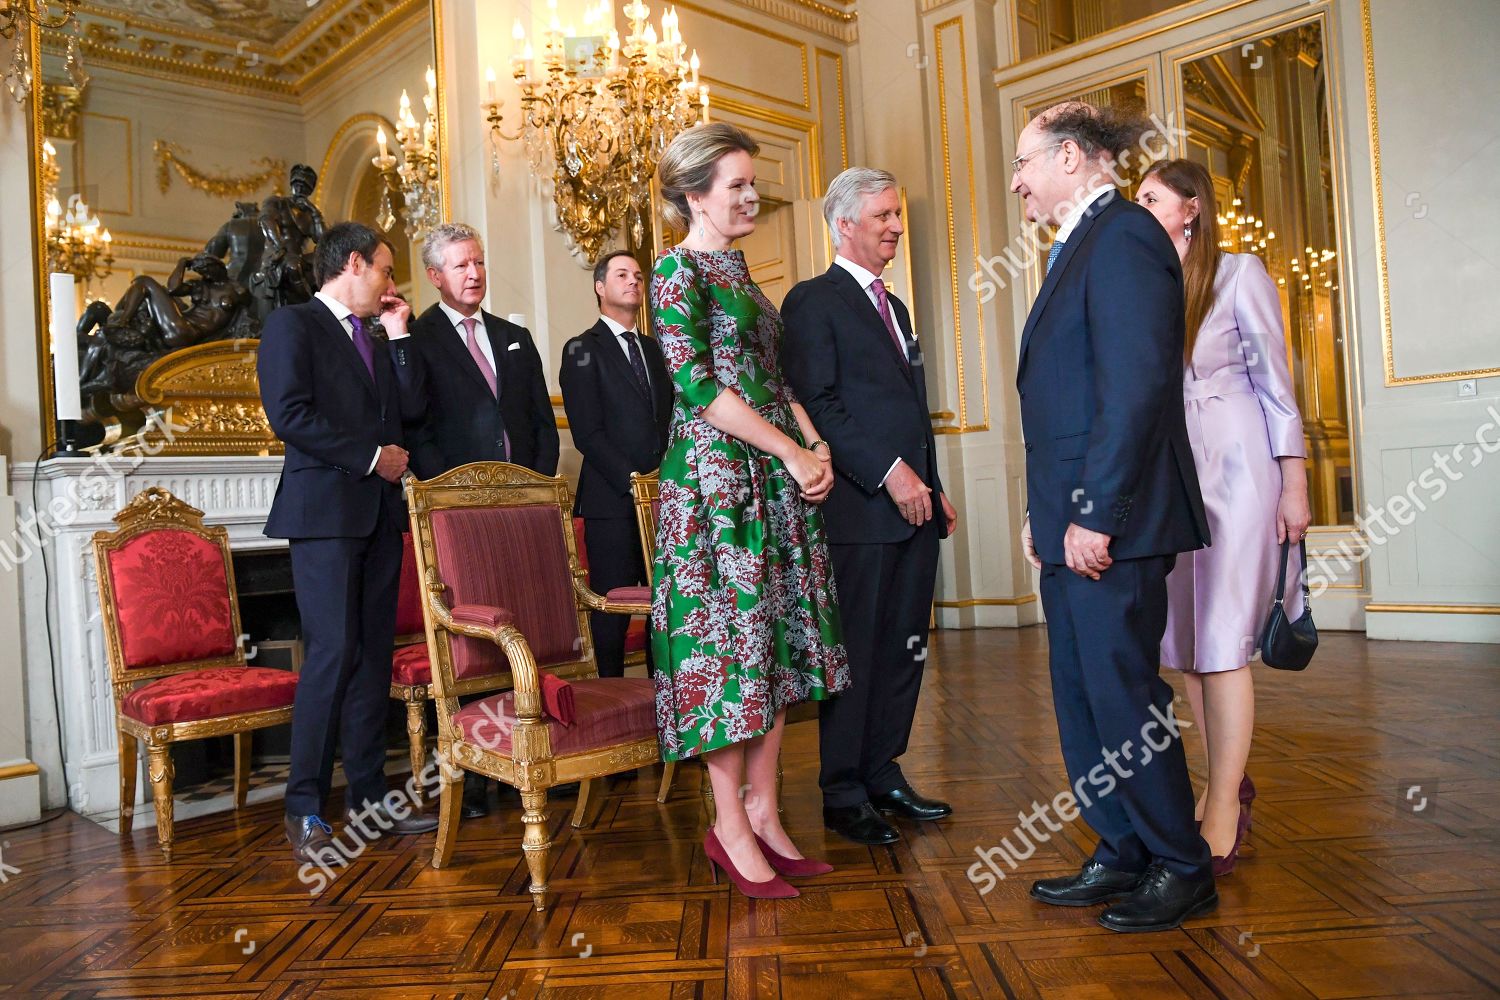 CASA REAL BELGA - Página 93 King-philippe-and-queen-mathilde-receive-the-heads-of-diplomatic-missions-brussels-belgium-shutterstock-editorial-10525487i